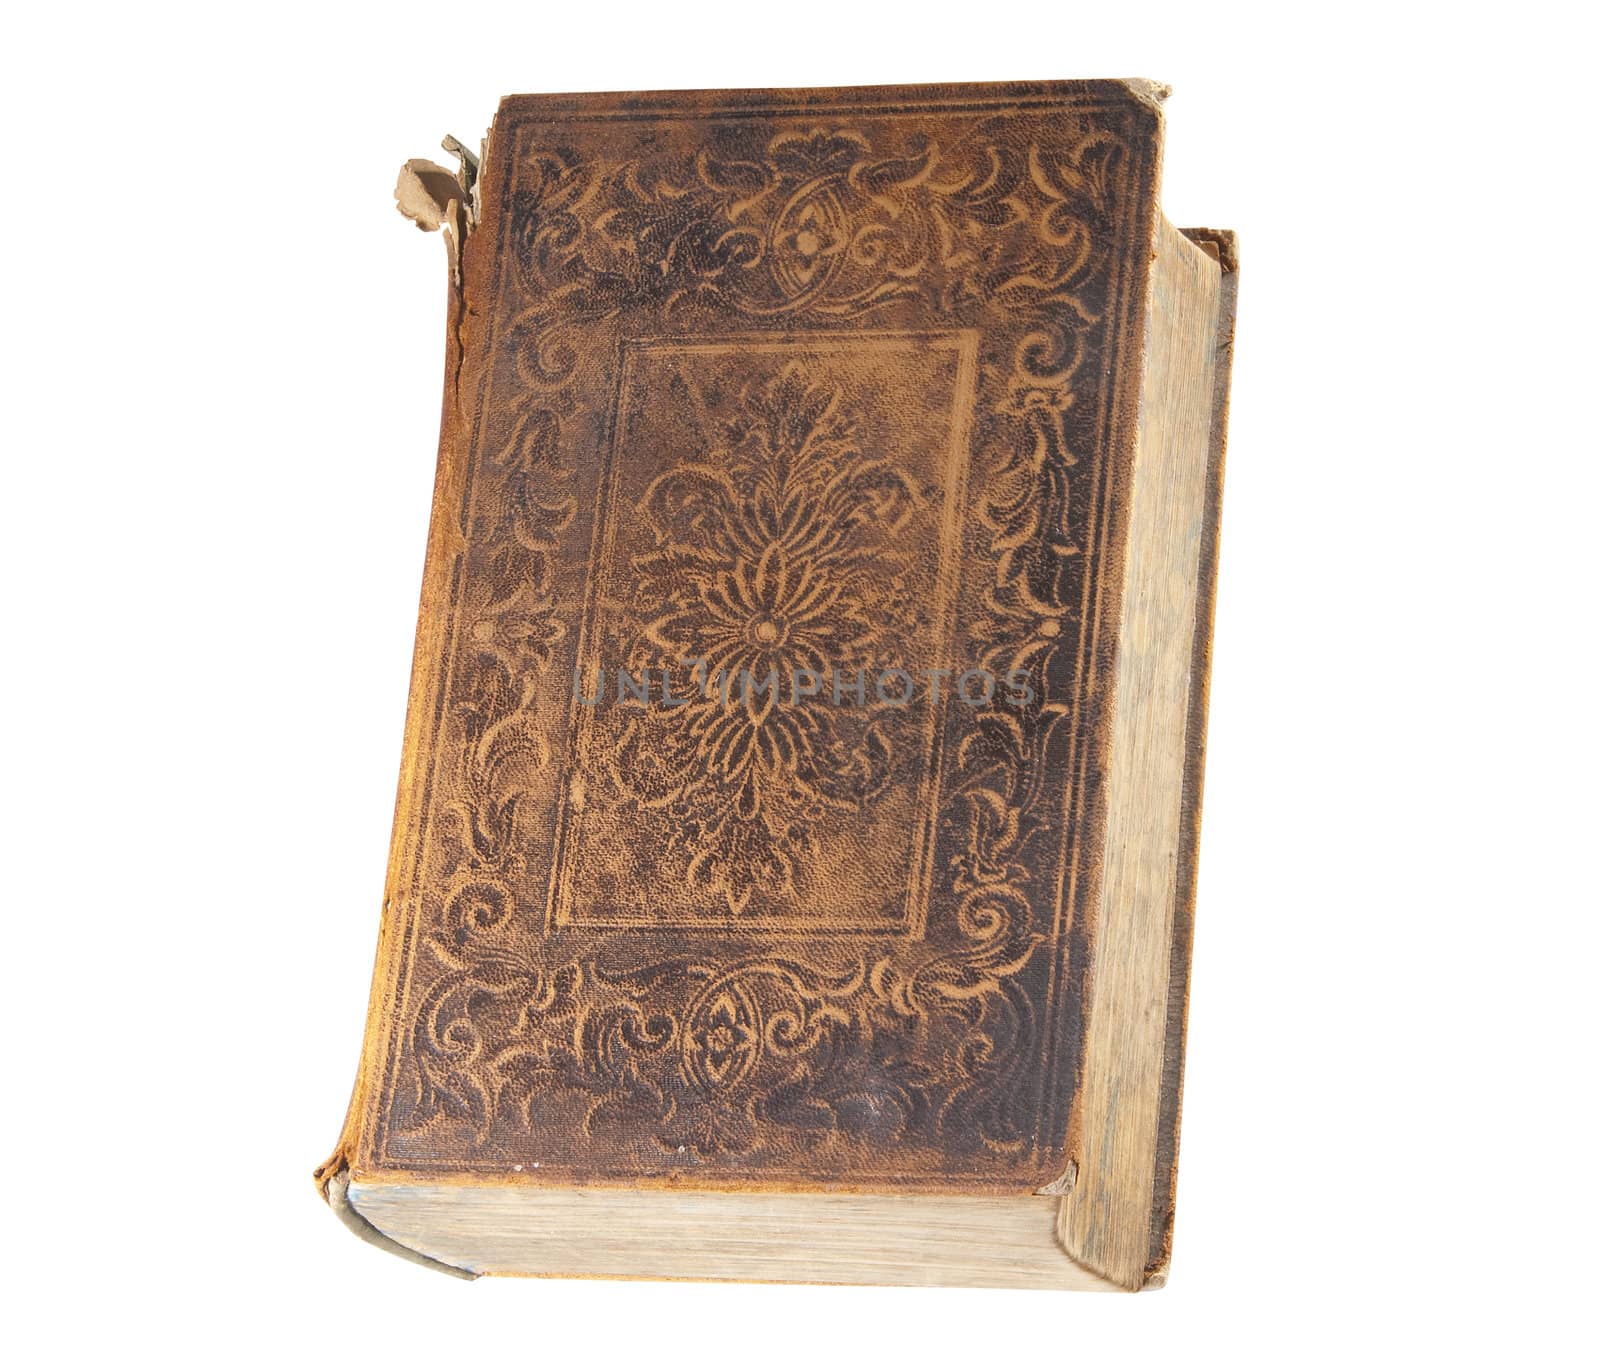 Antique leather book isolated over white